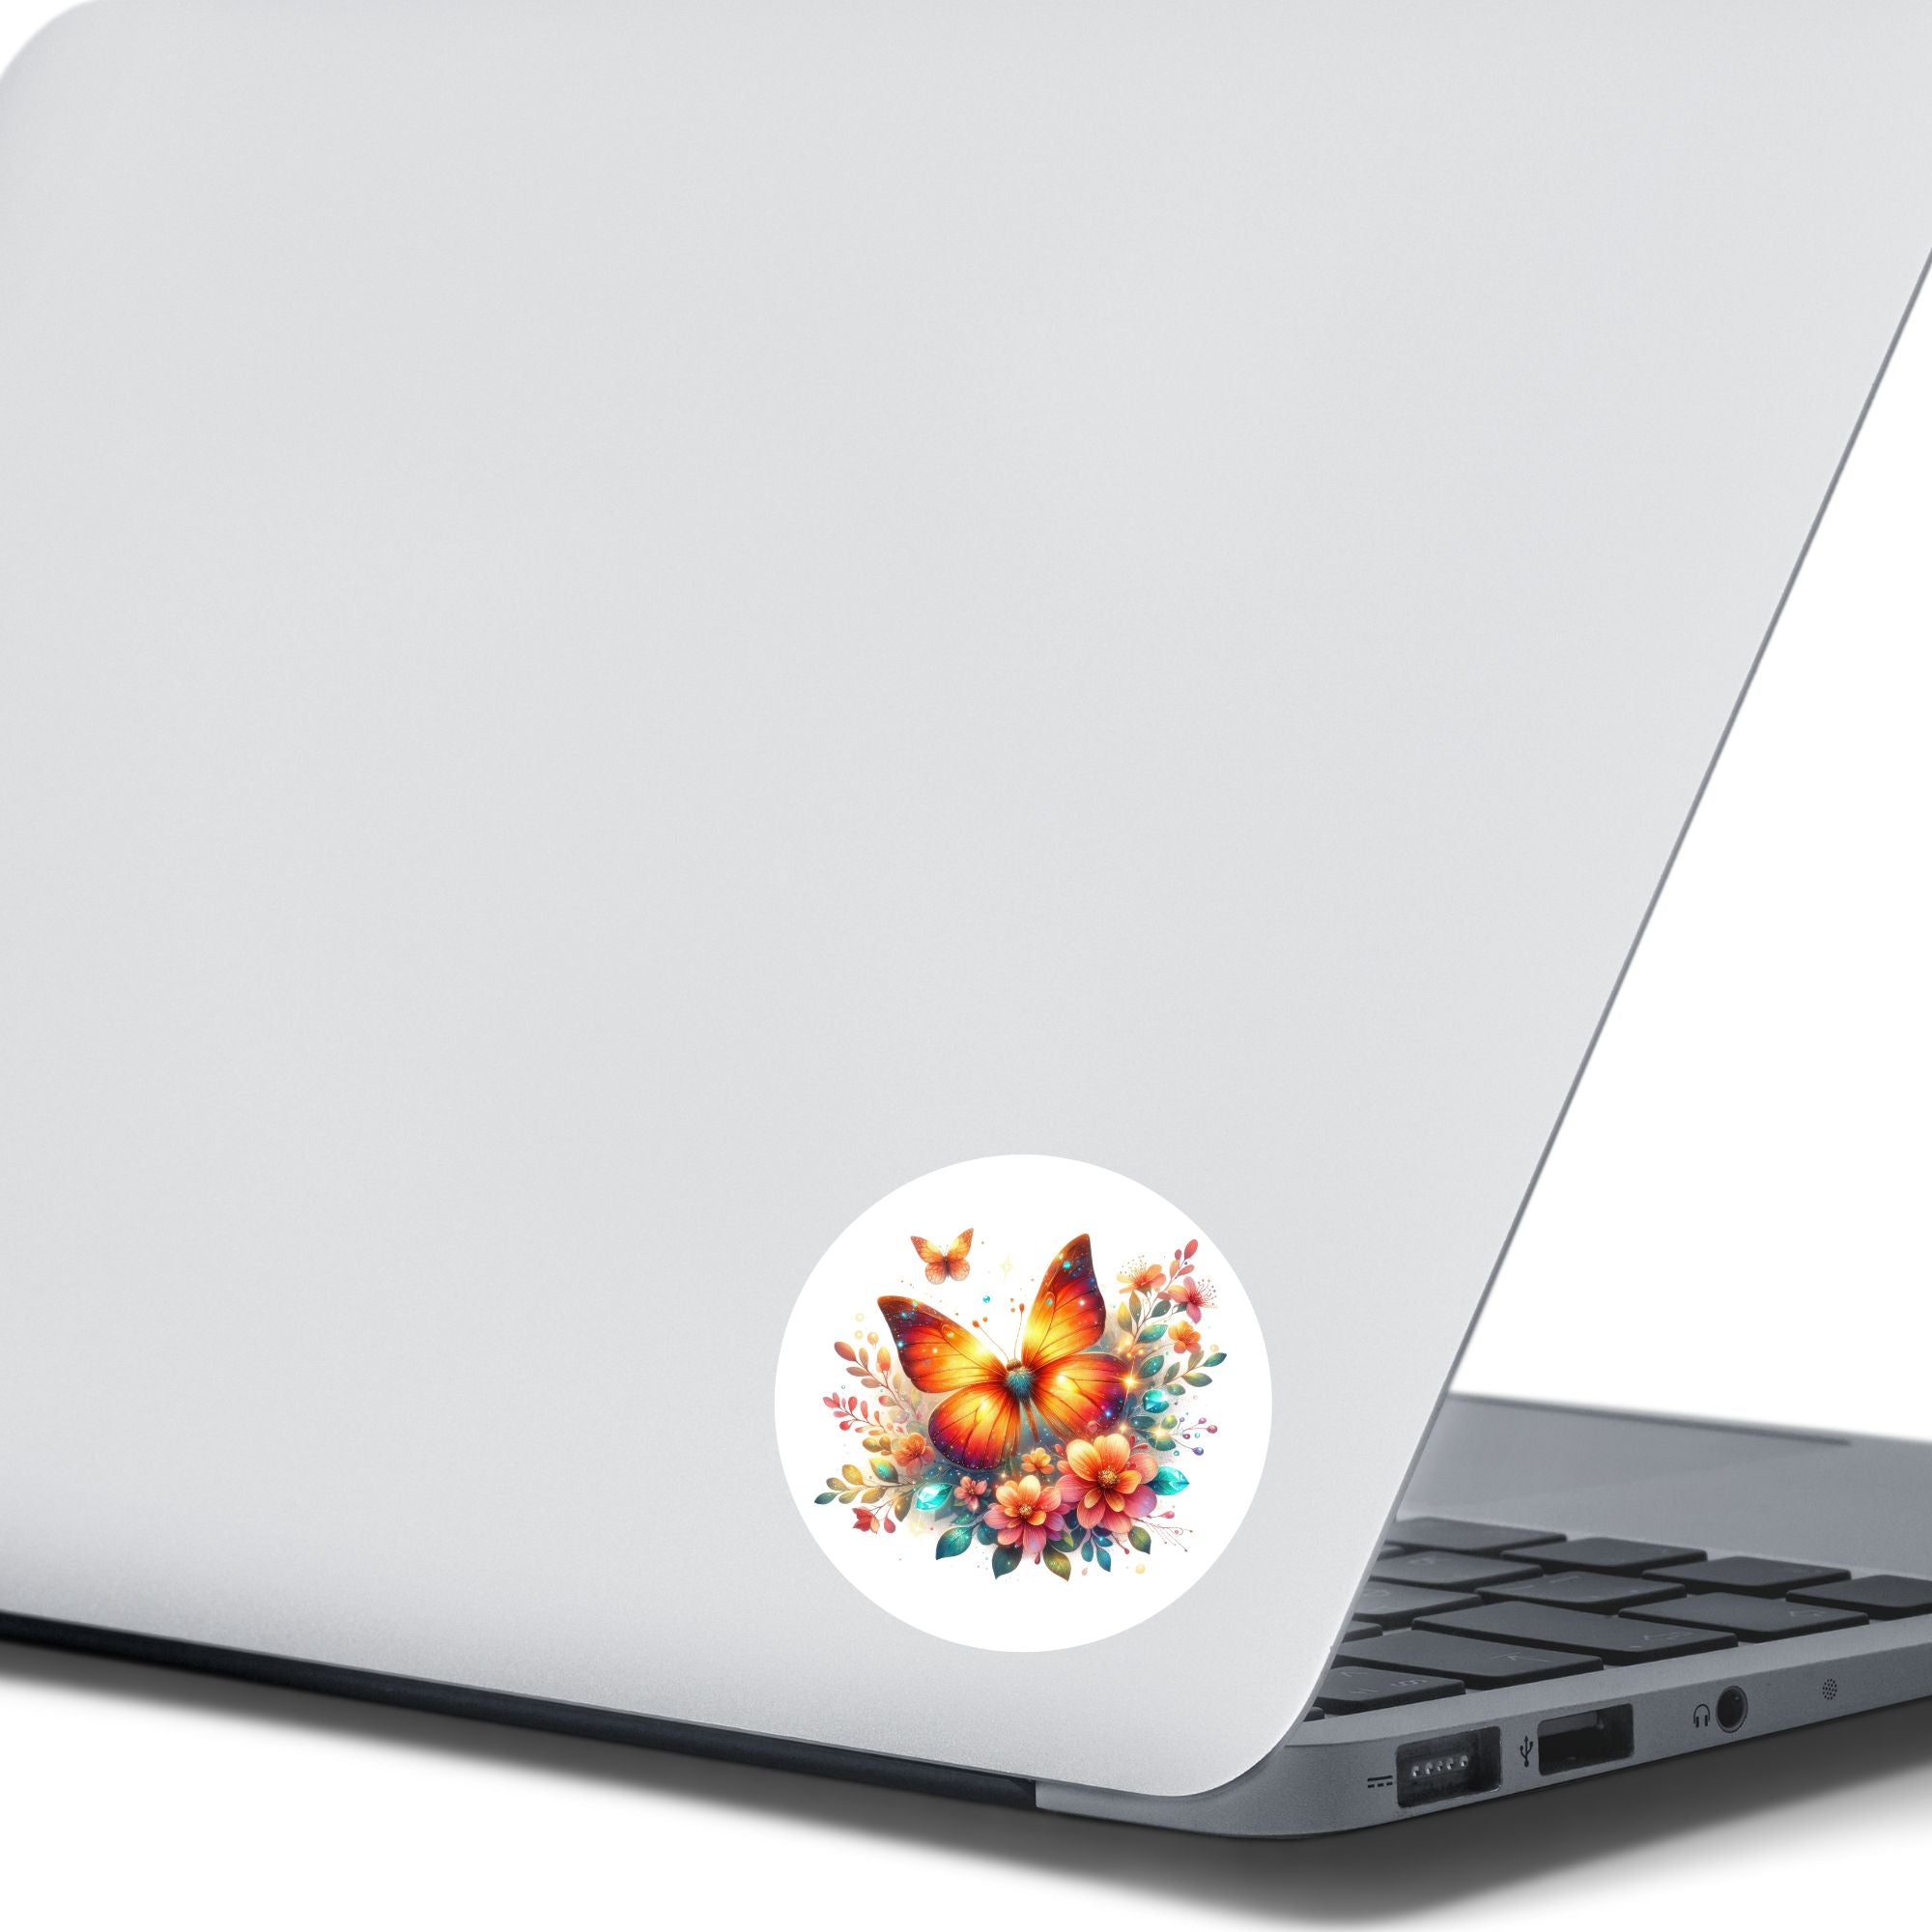 This image shows the Orange Butterfly with Stars Die-Cut Sticker on the back of an open laptop.